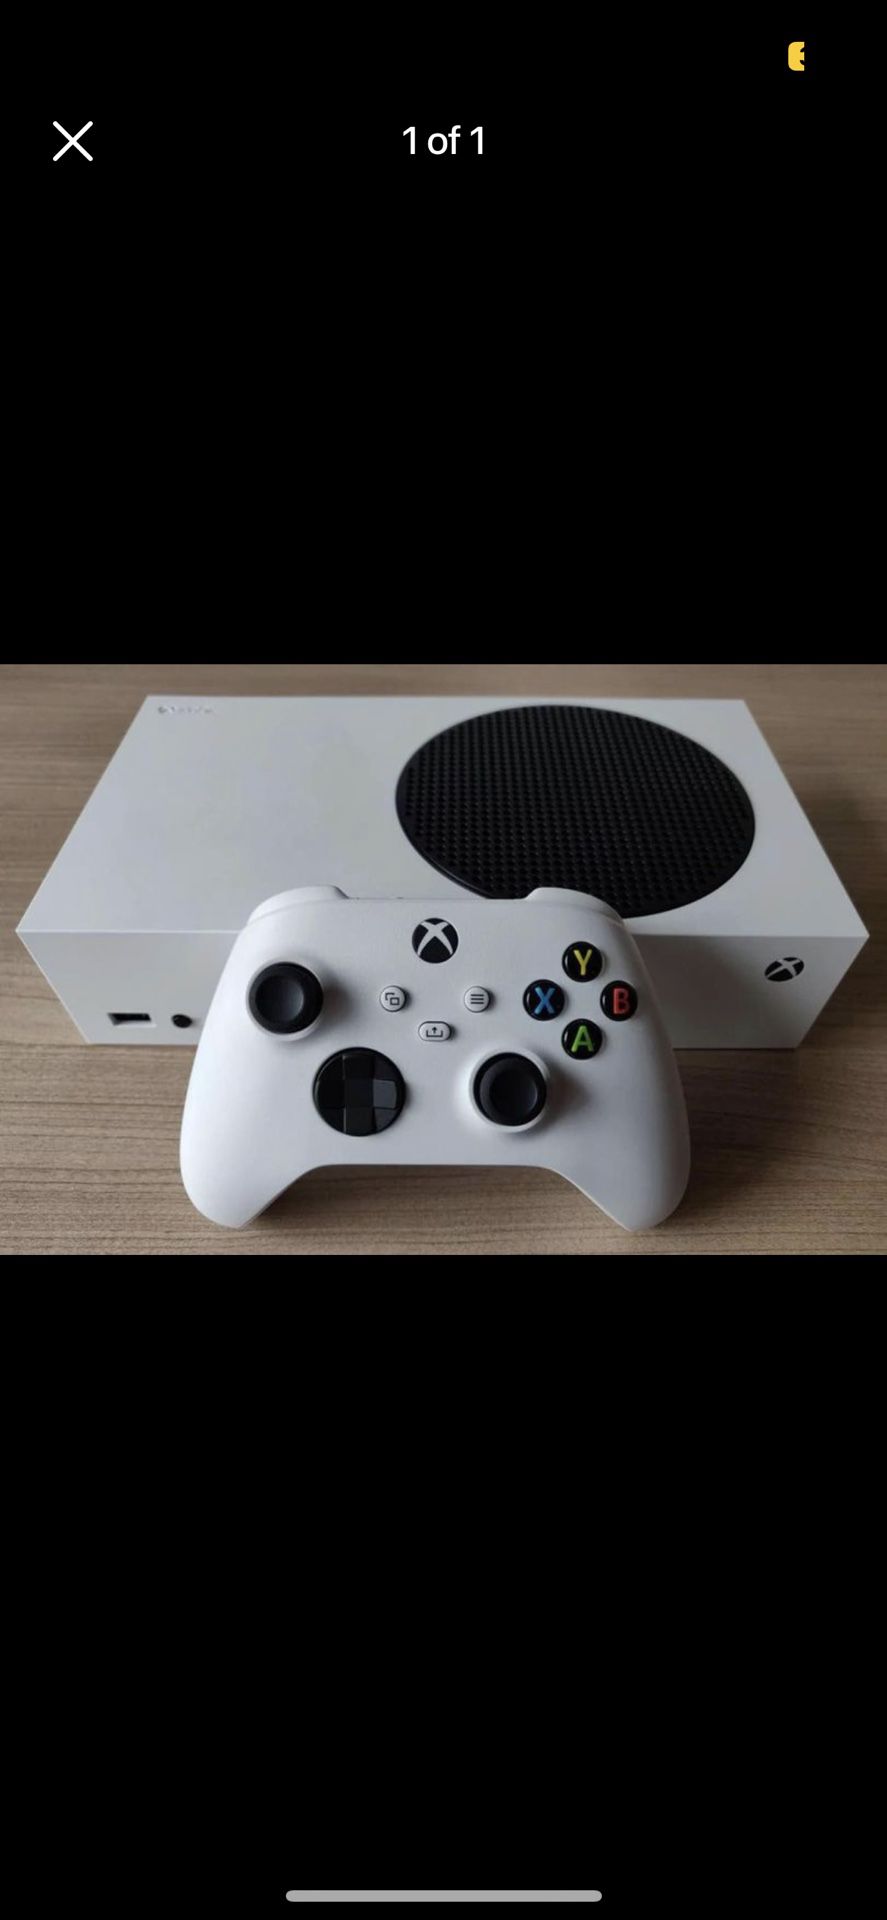 TRADE ONLY READ DESCRIPTION: Xbox One S 